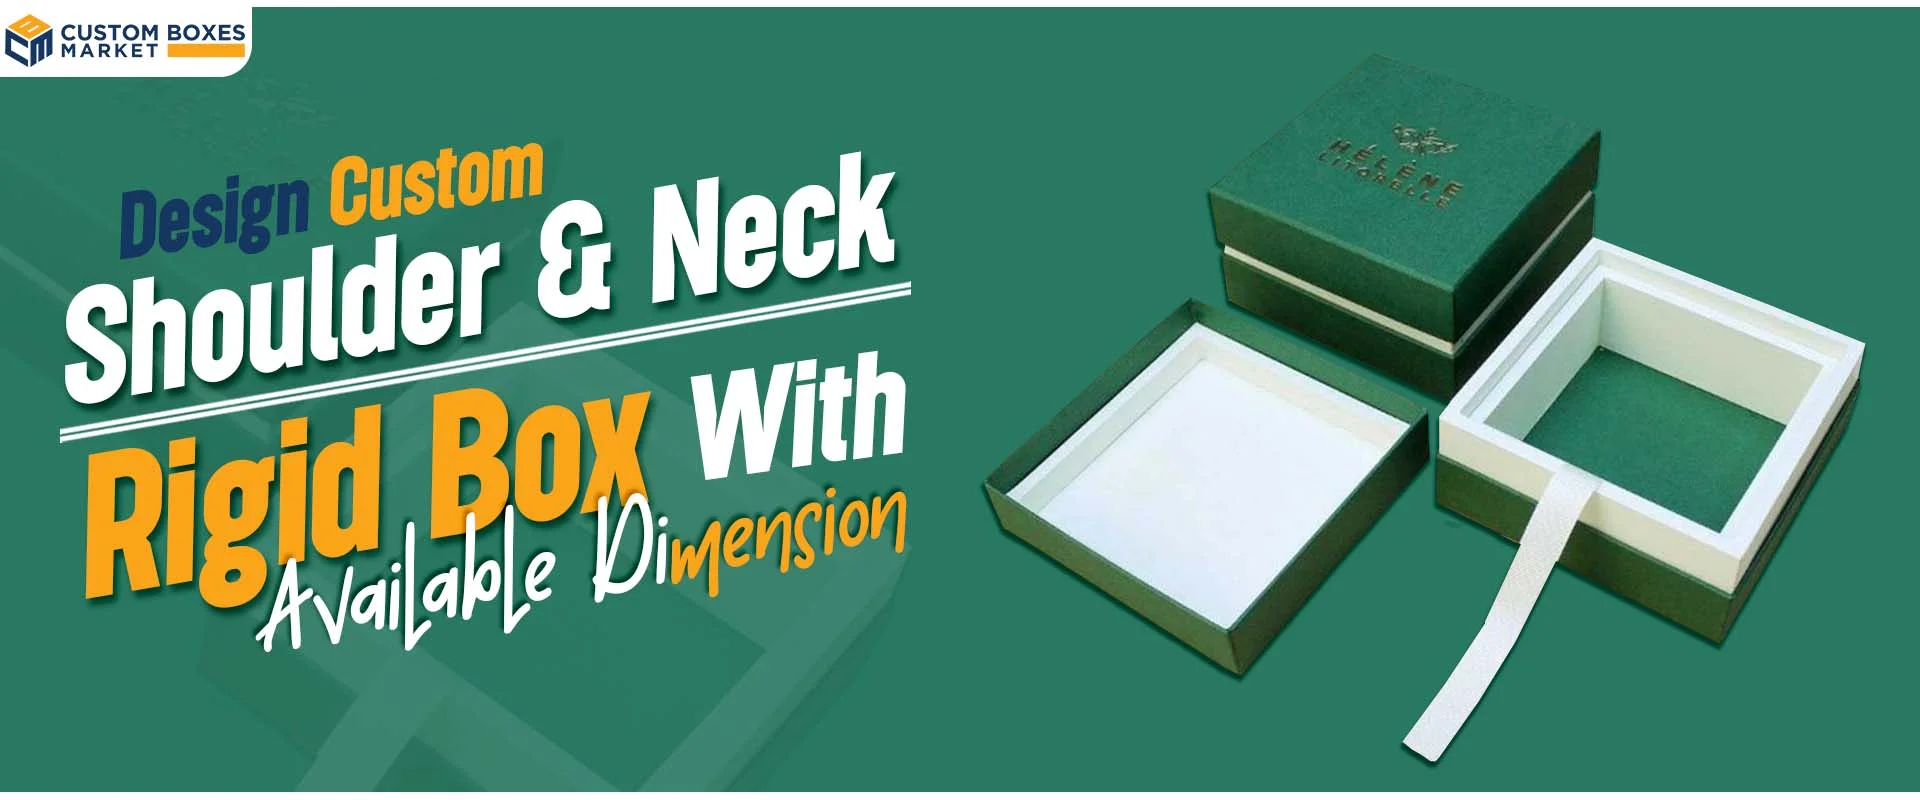 Design Custom Shoulder & Neck Rigid Box with Available Dimensions